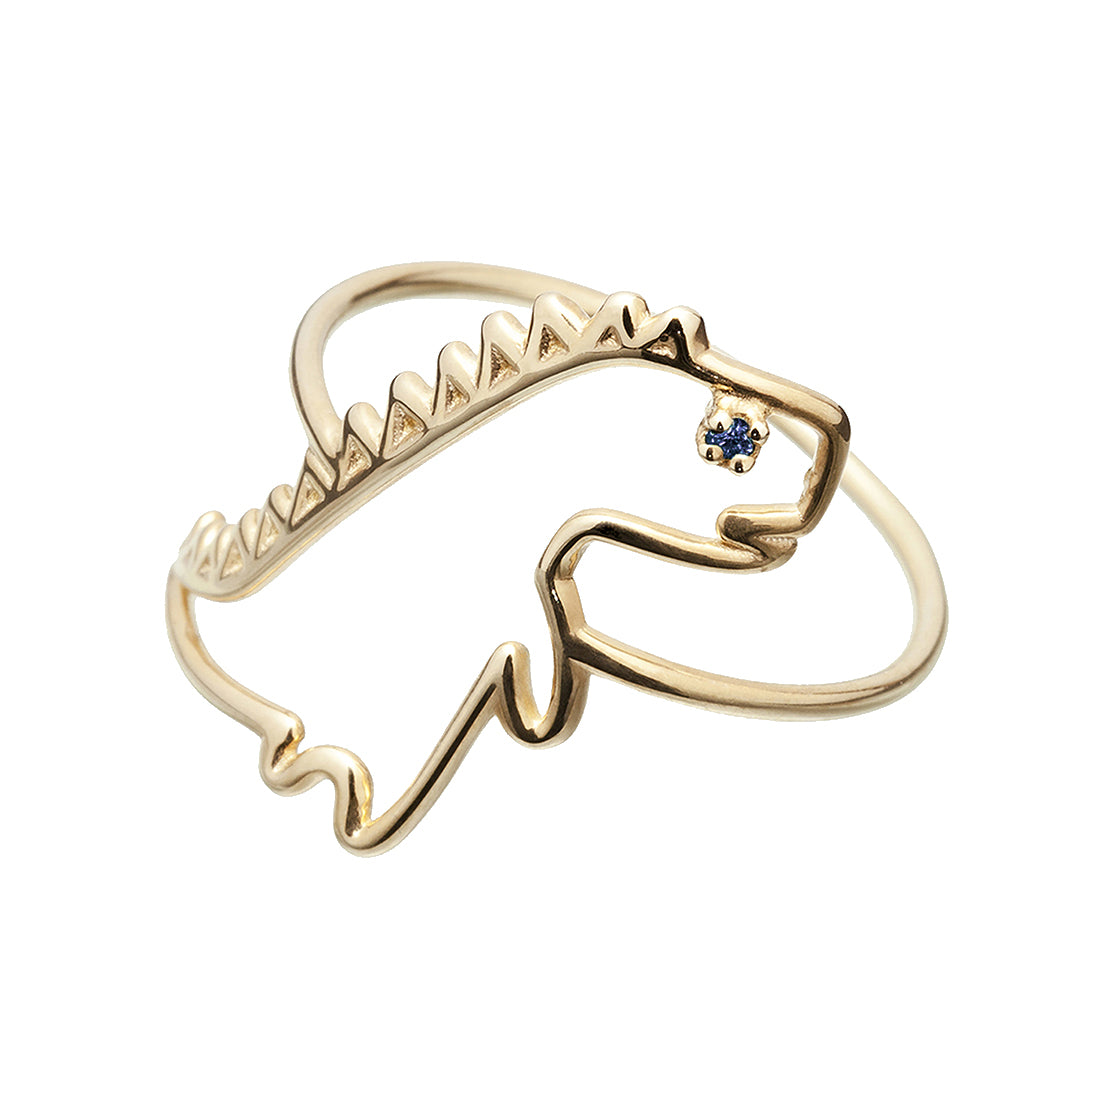 Dinosaur shaped gold ring with small blue sapphire